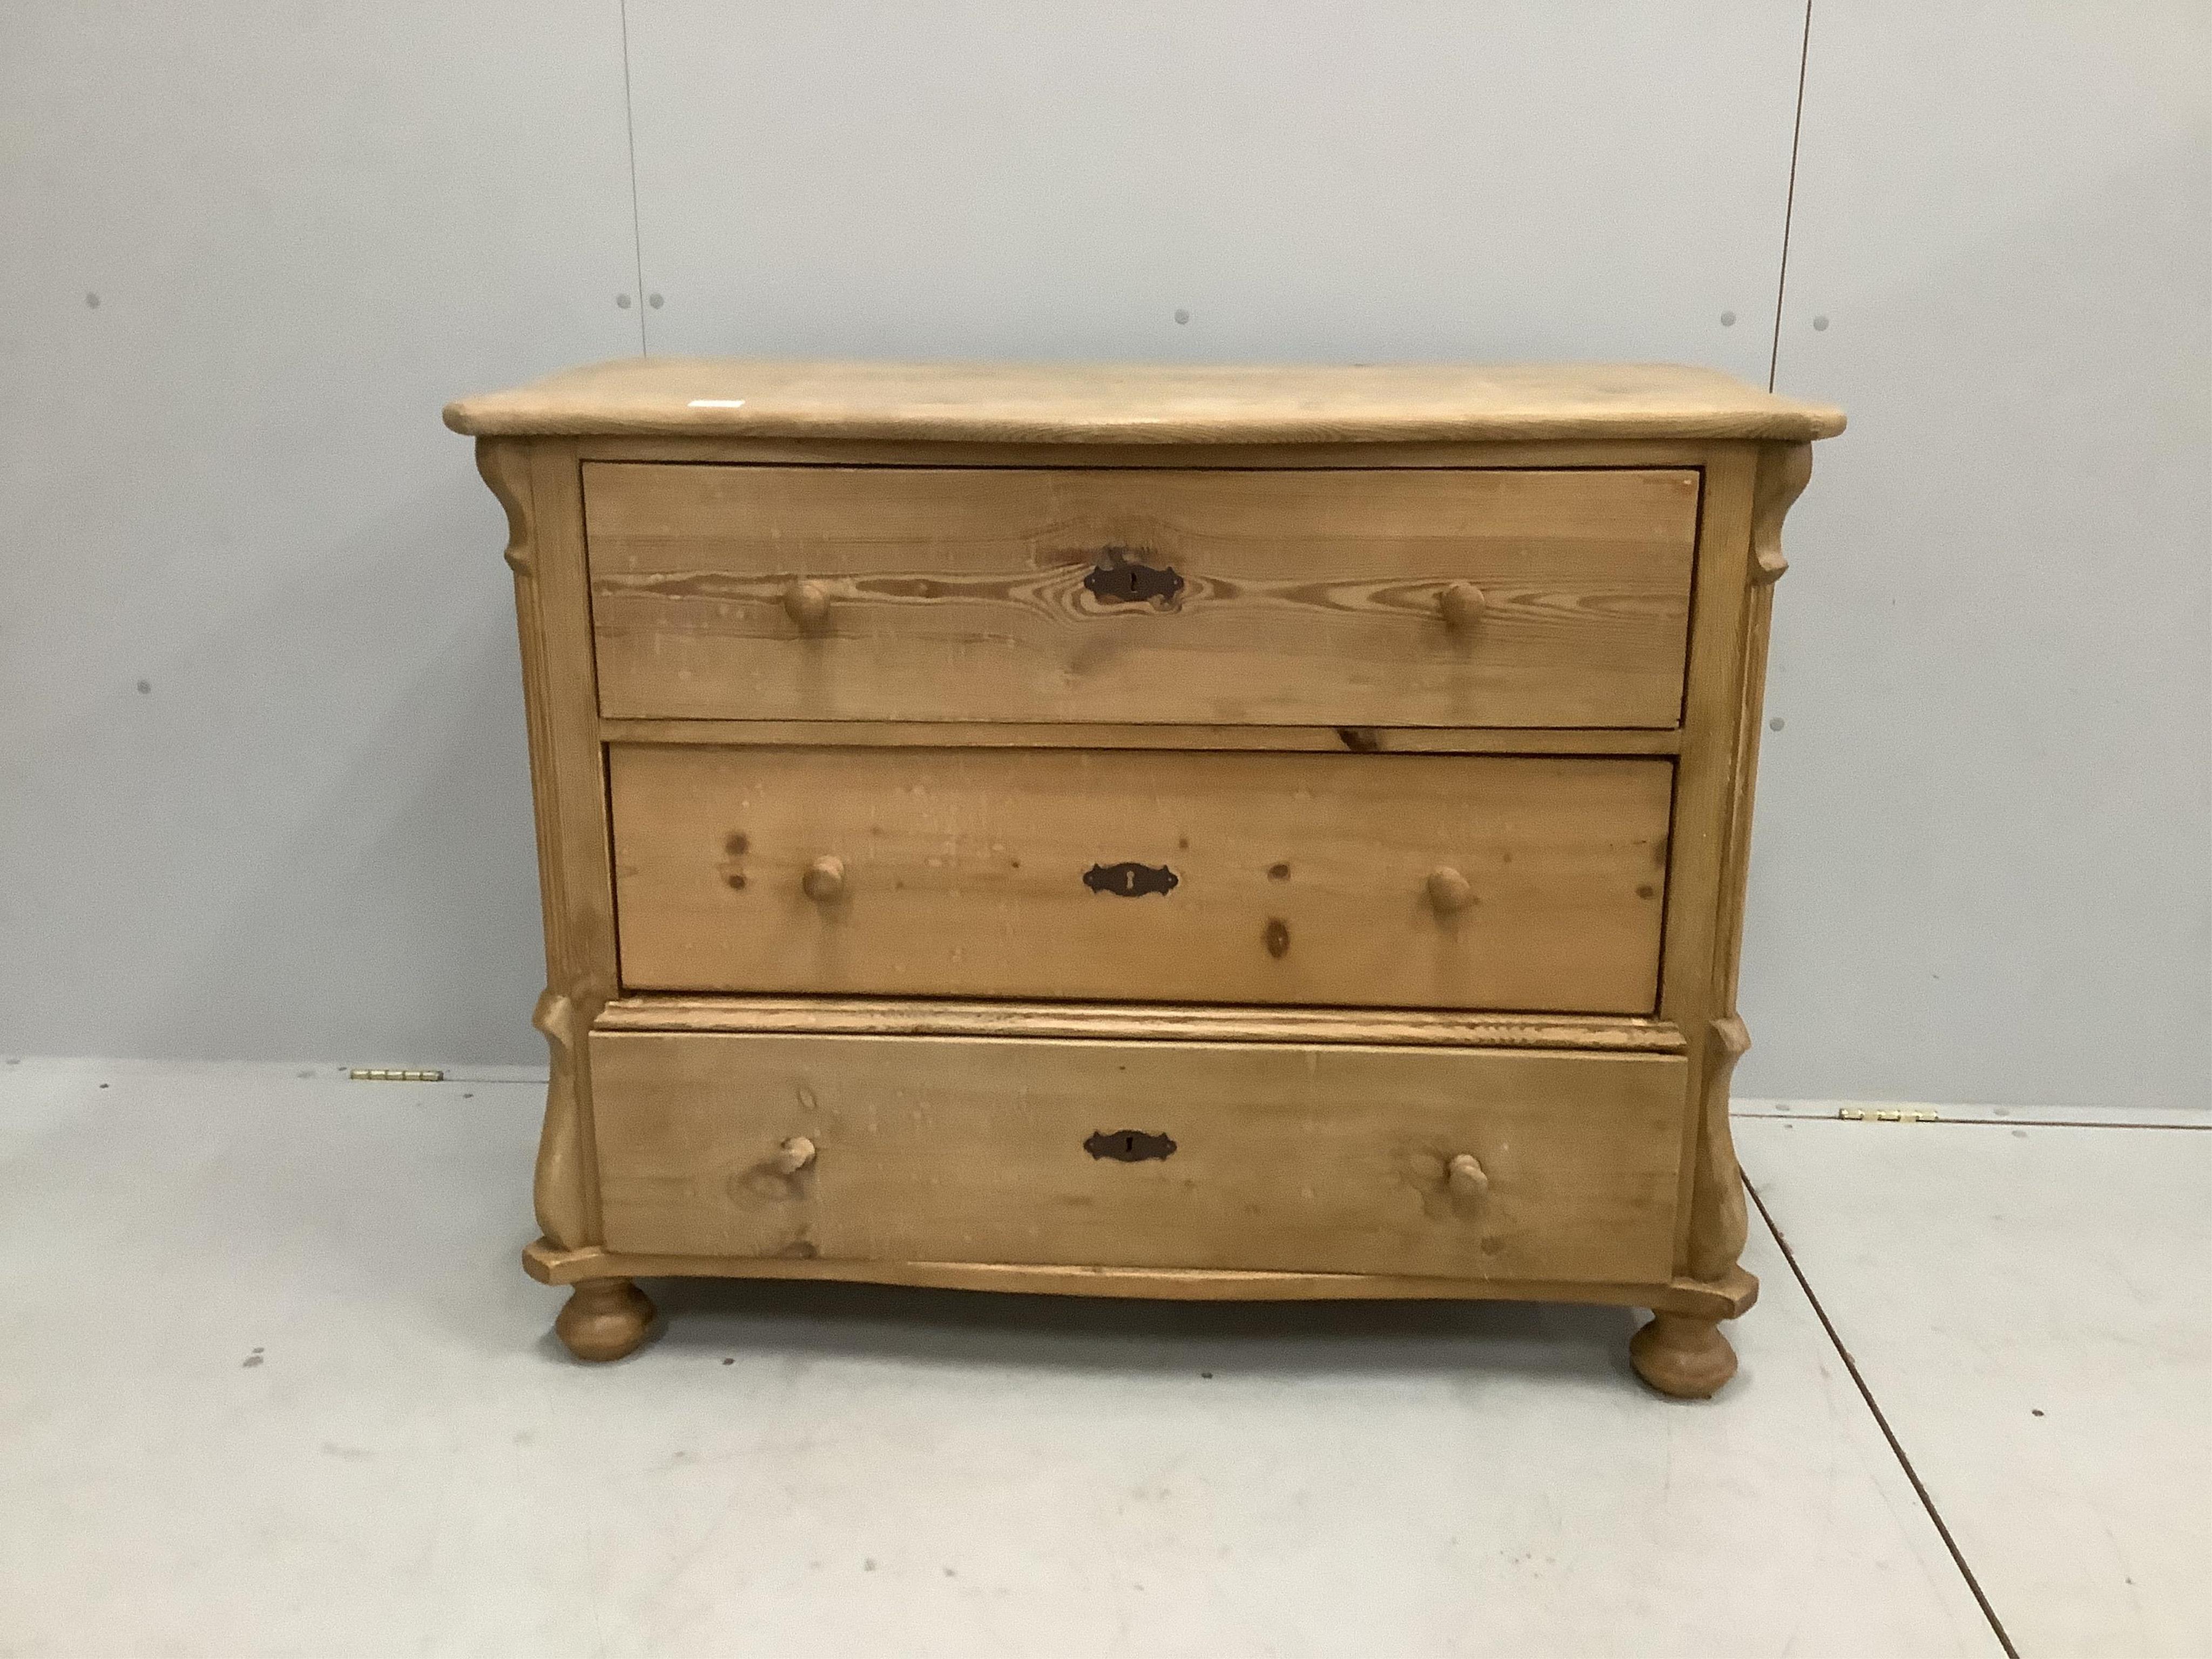 A 19th century Continental stripped pine commode, width 108cm, depth 54cm, height 86cm. Condition - fair